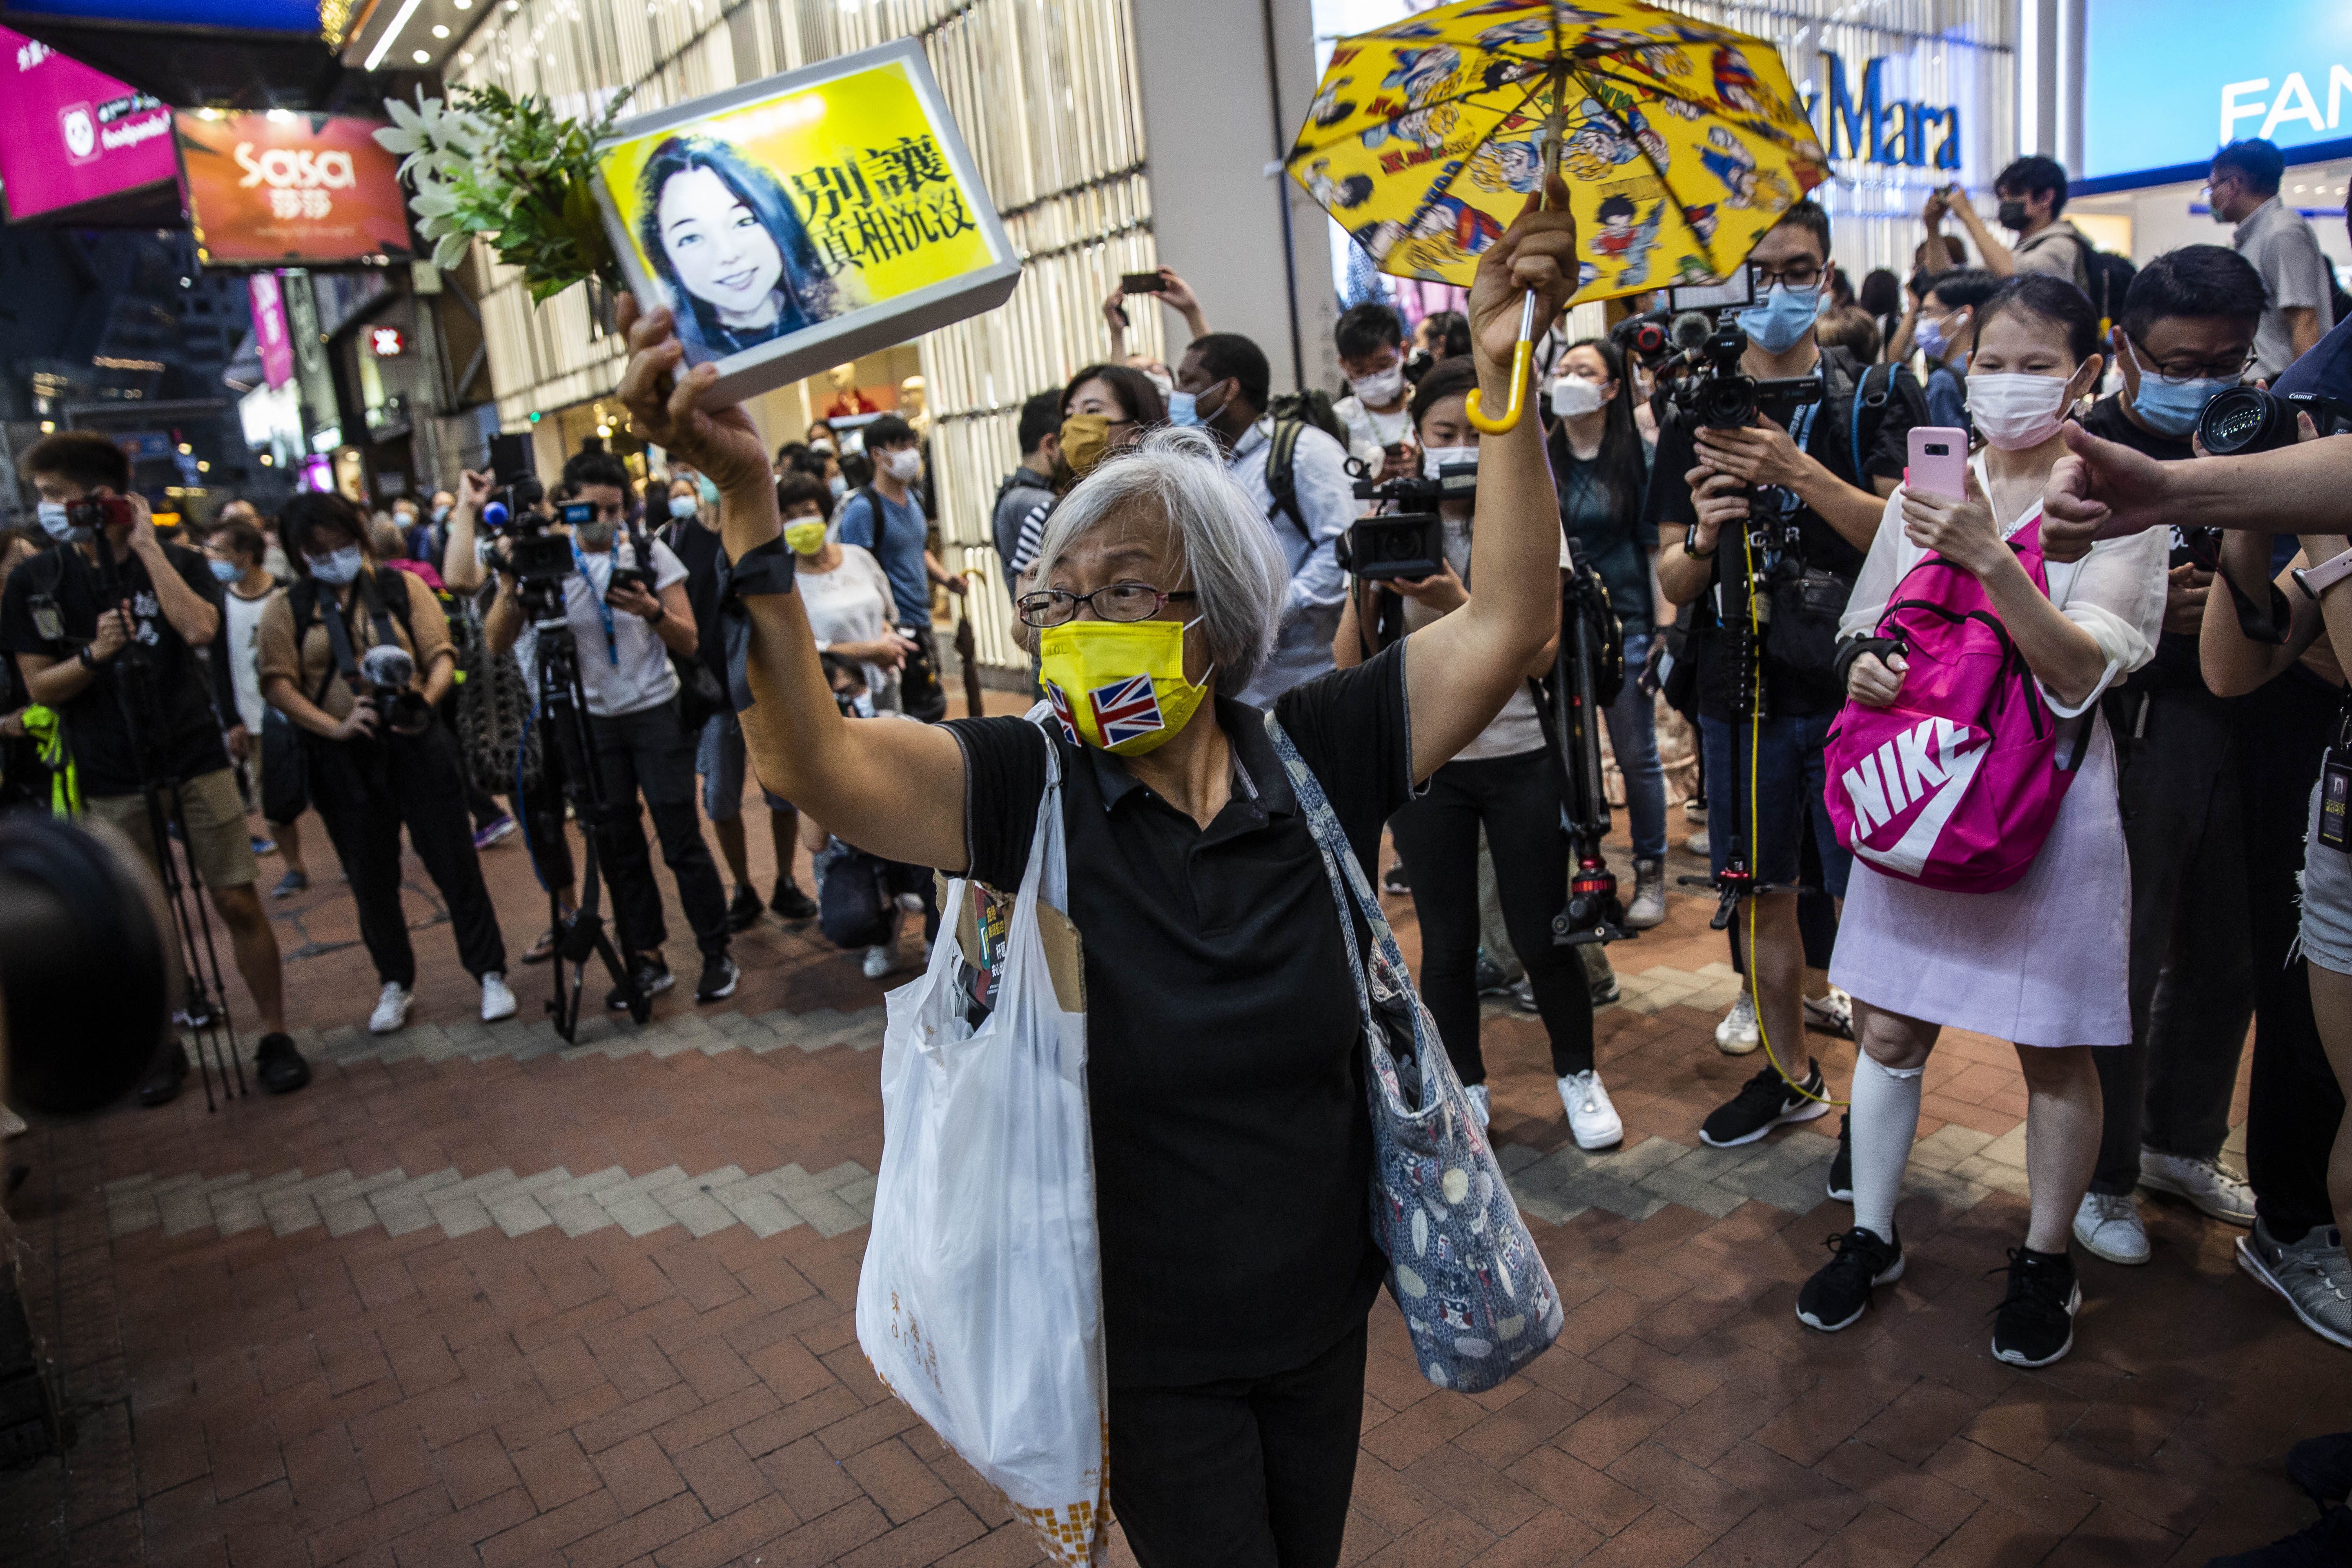 Photo of a masked elderly lady holding a yellow umbrella and sign while surrounded by protesters